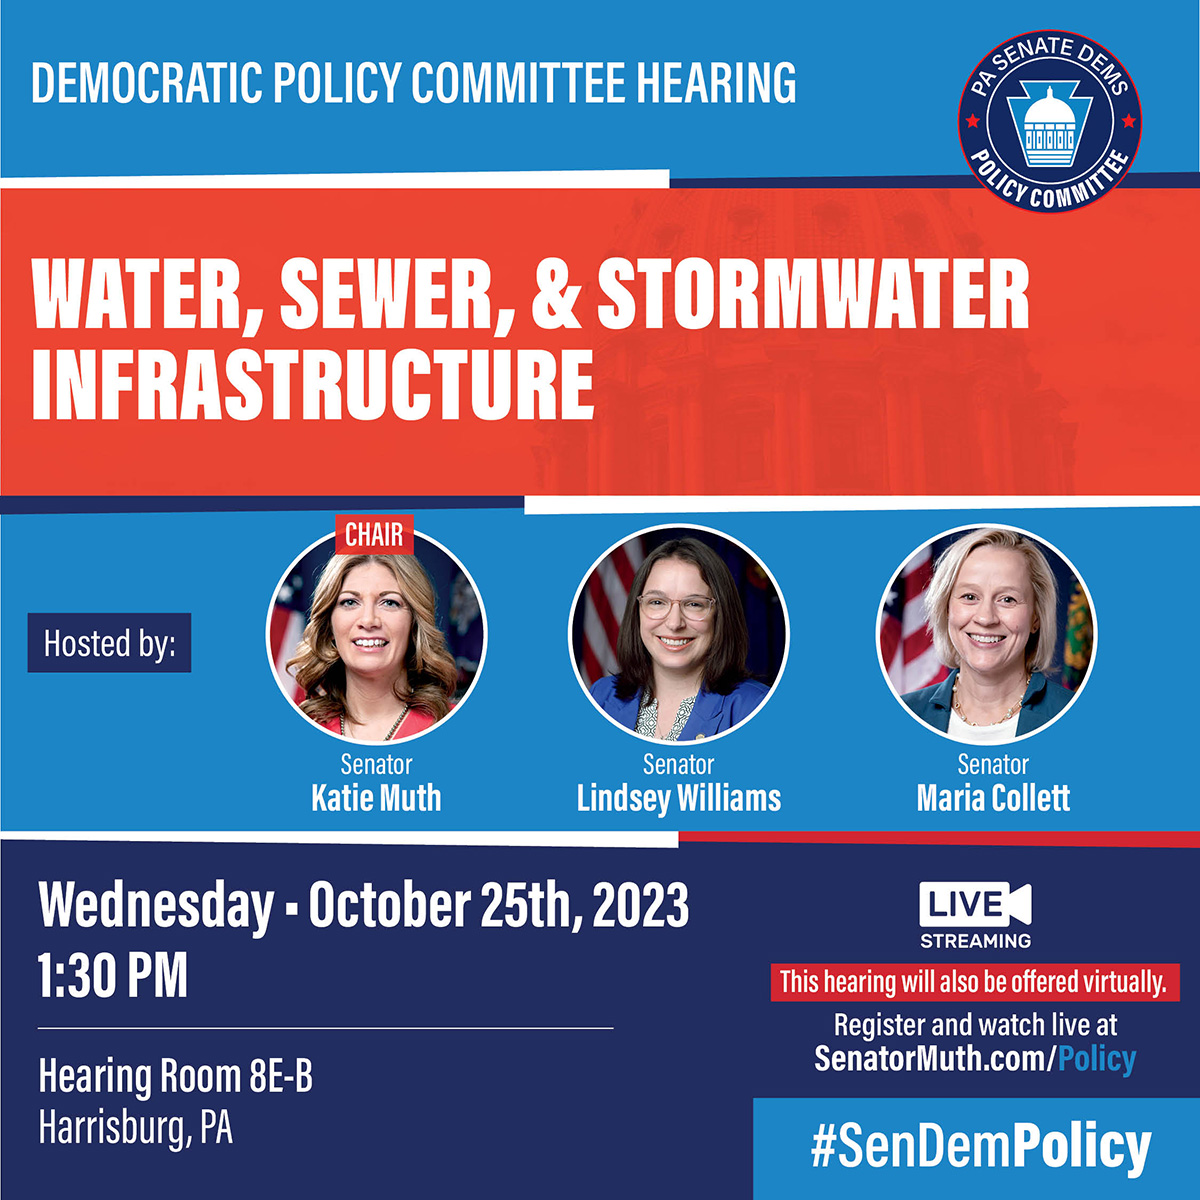 Policy Hearing - Water, Sewer, & Stormwater Infrastructure